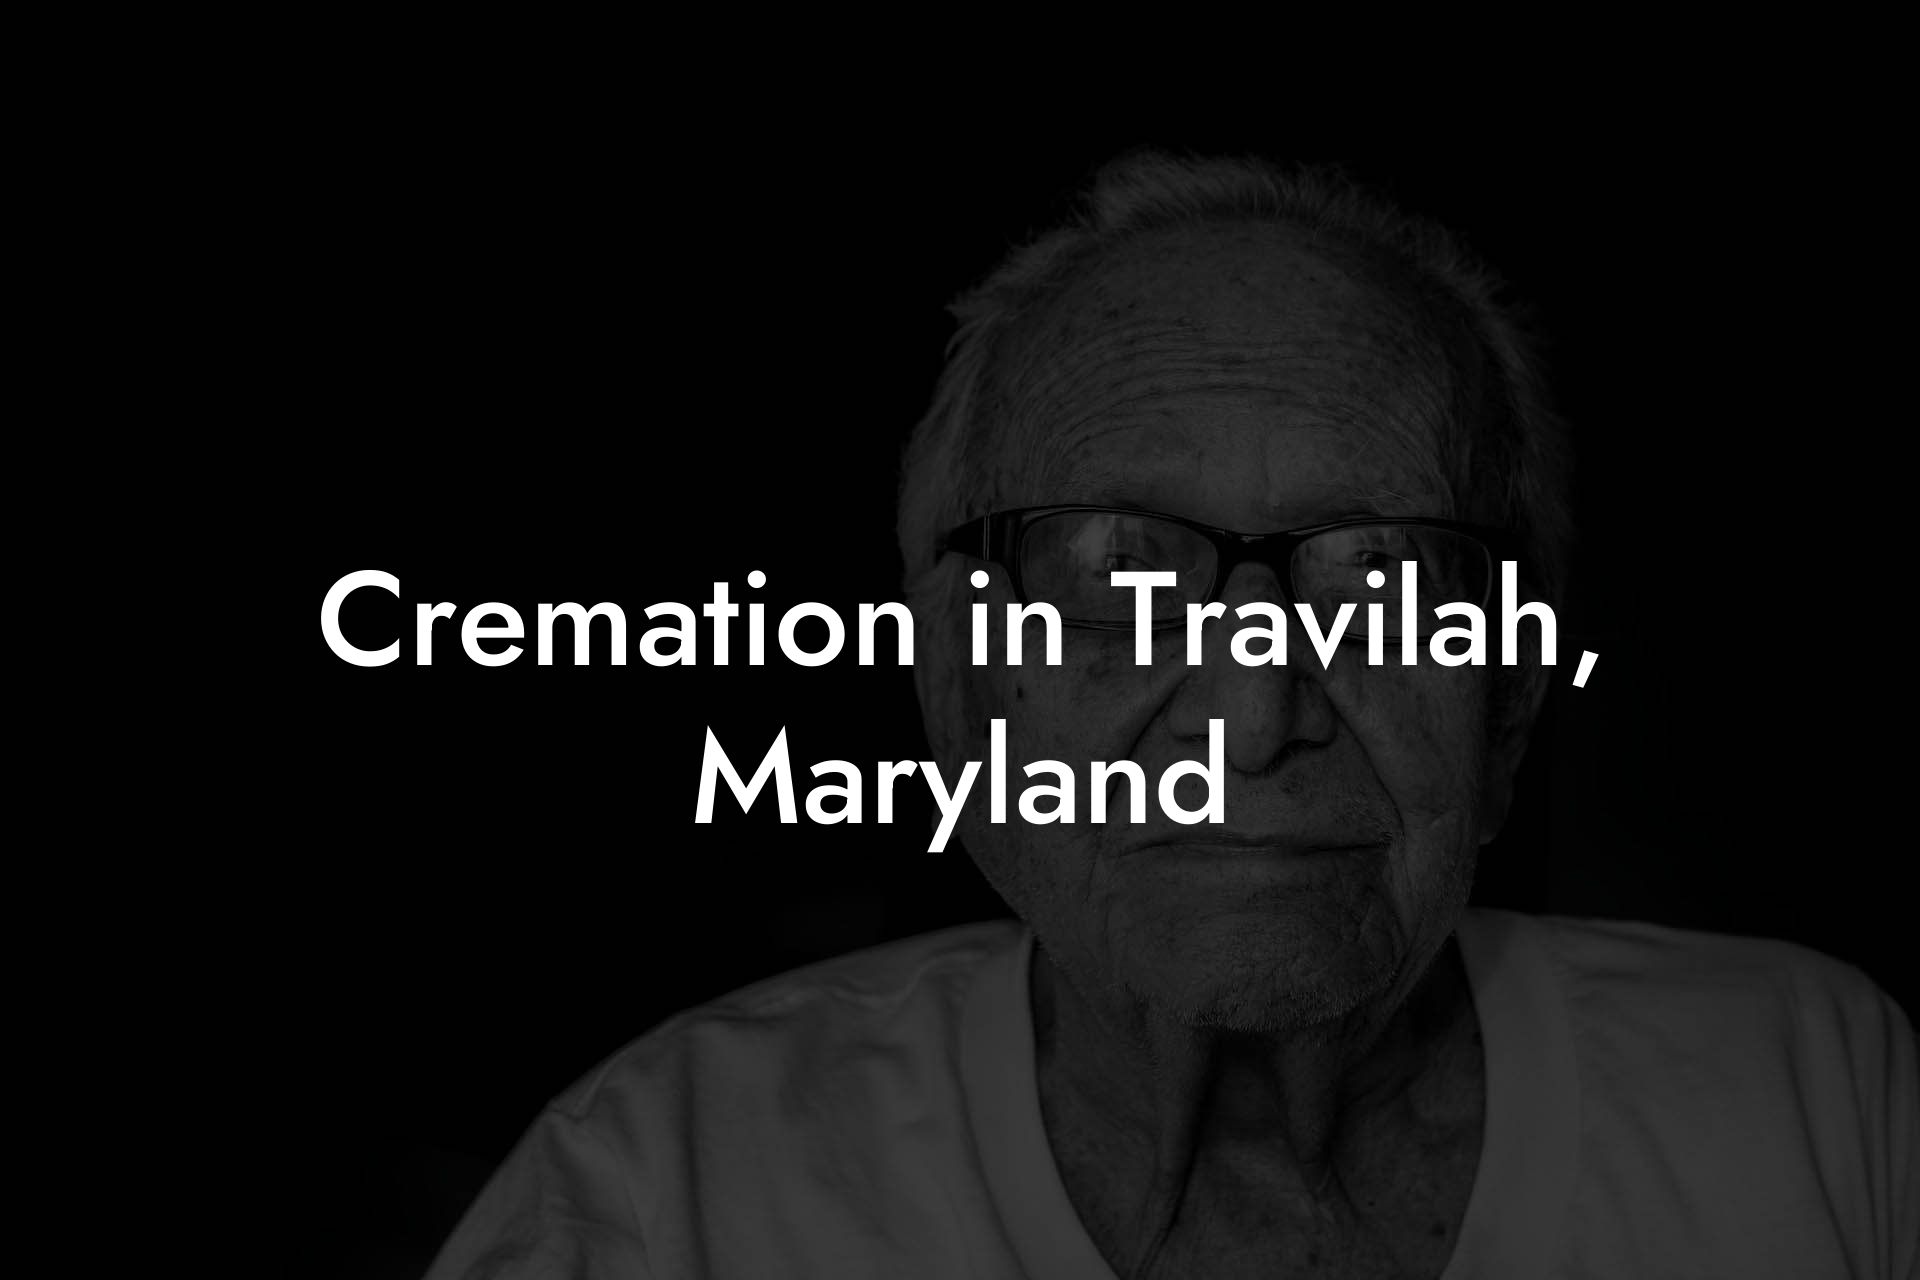 Cremation in Travilah, Maryland